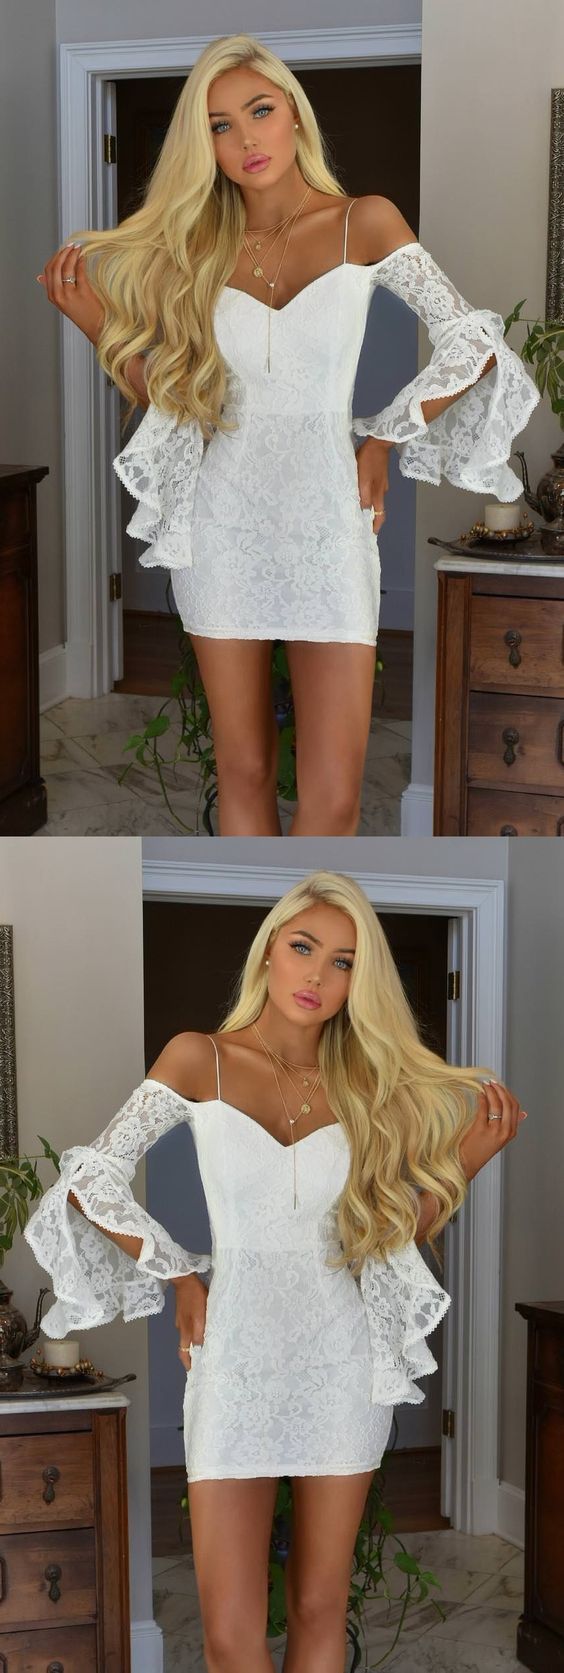 Homecoming Dresses Ida Lace Cocktail Sheath Off-The-Shoulder Bell Sleeves Short White Dress DZ4588